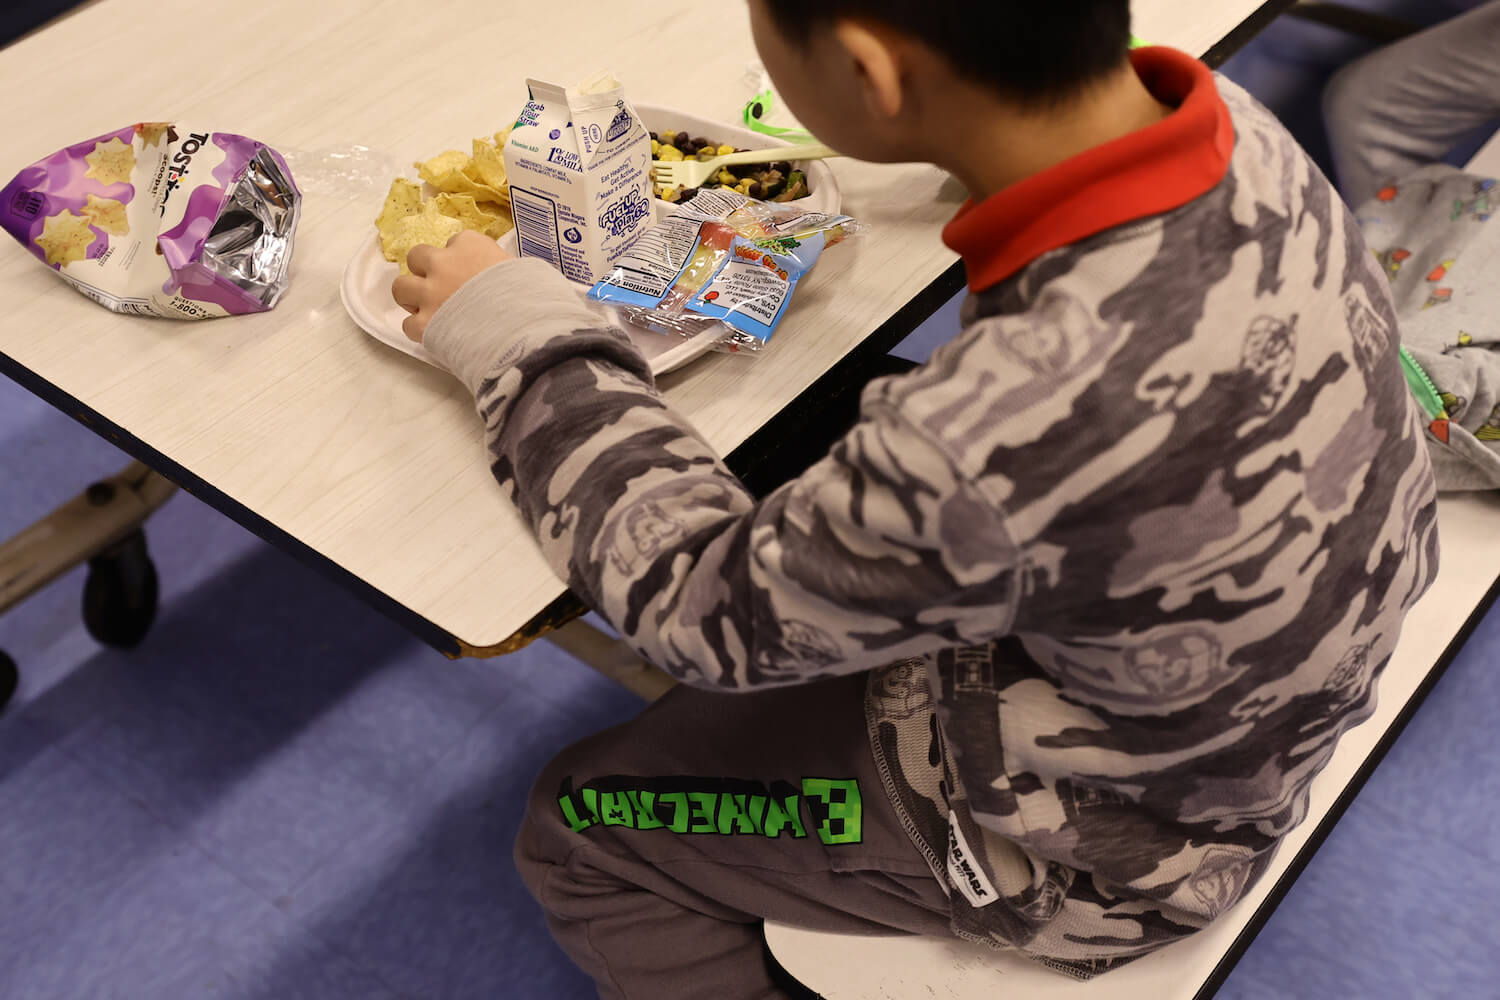 A student eats a vegan meal served for lunch (with milk as a drink) at Yung Wing School P.S. 124 on February 04, 2022 in New York City.